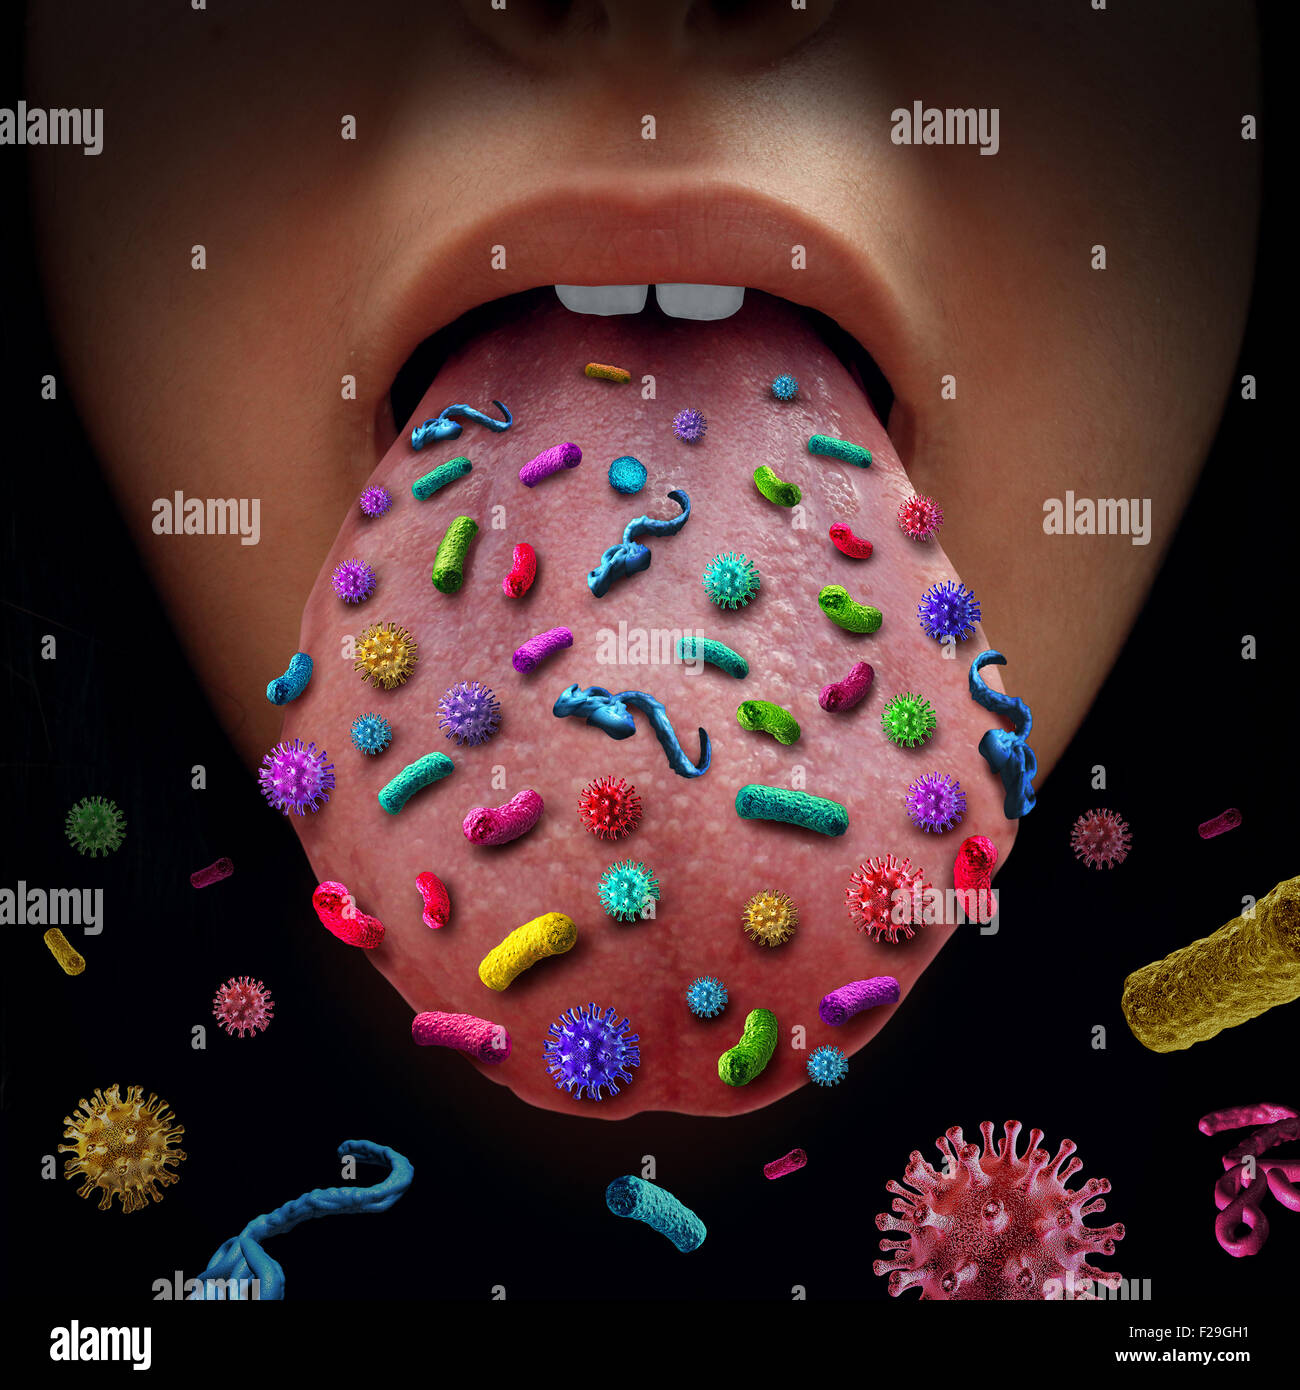 Mouth germs and contagious disease transmitting a virus infection with an open human mouth spreading dangerous infectious germs Stock Photo